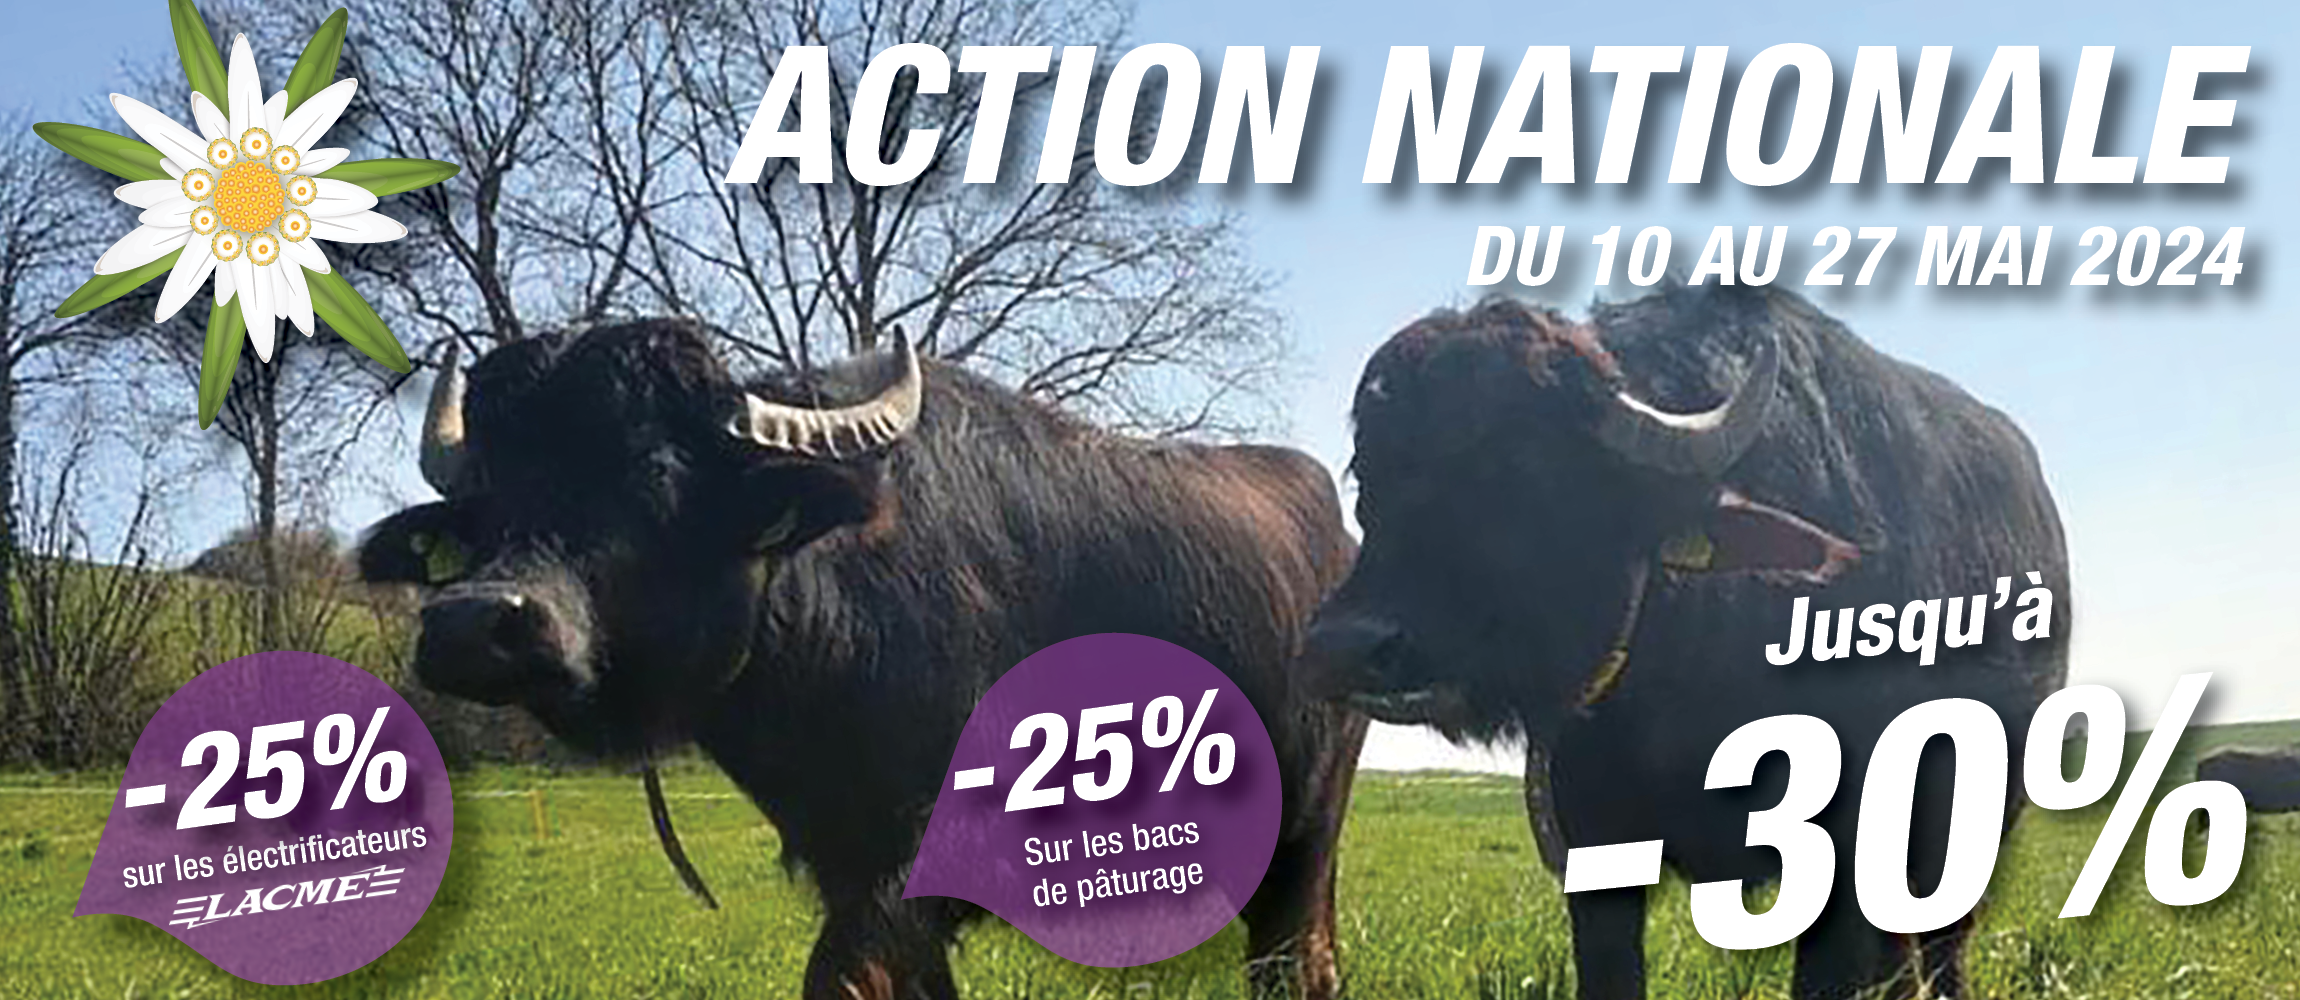 Action nationale